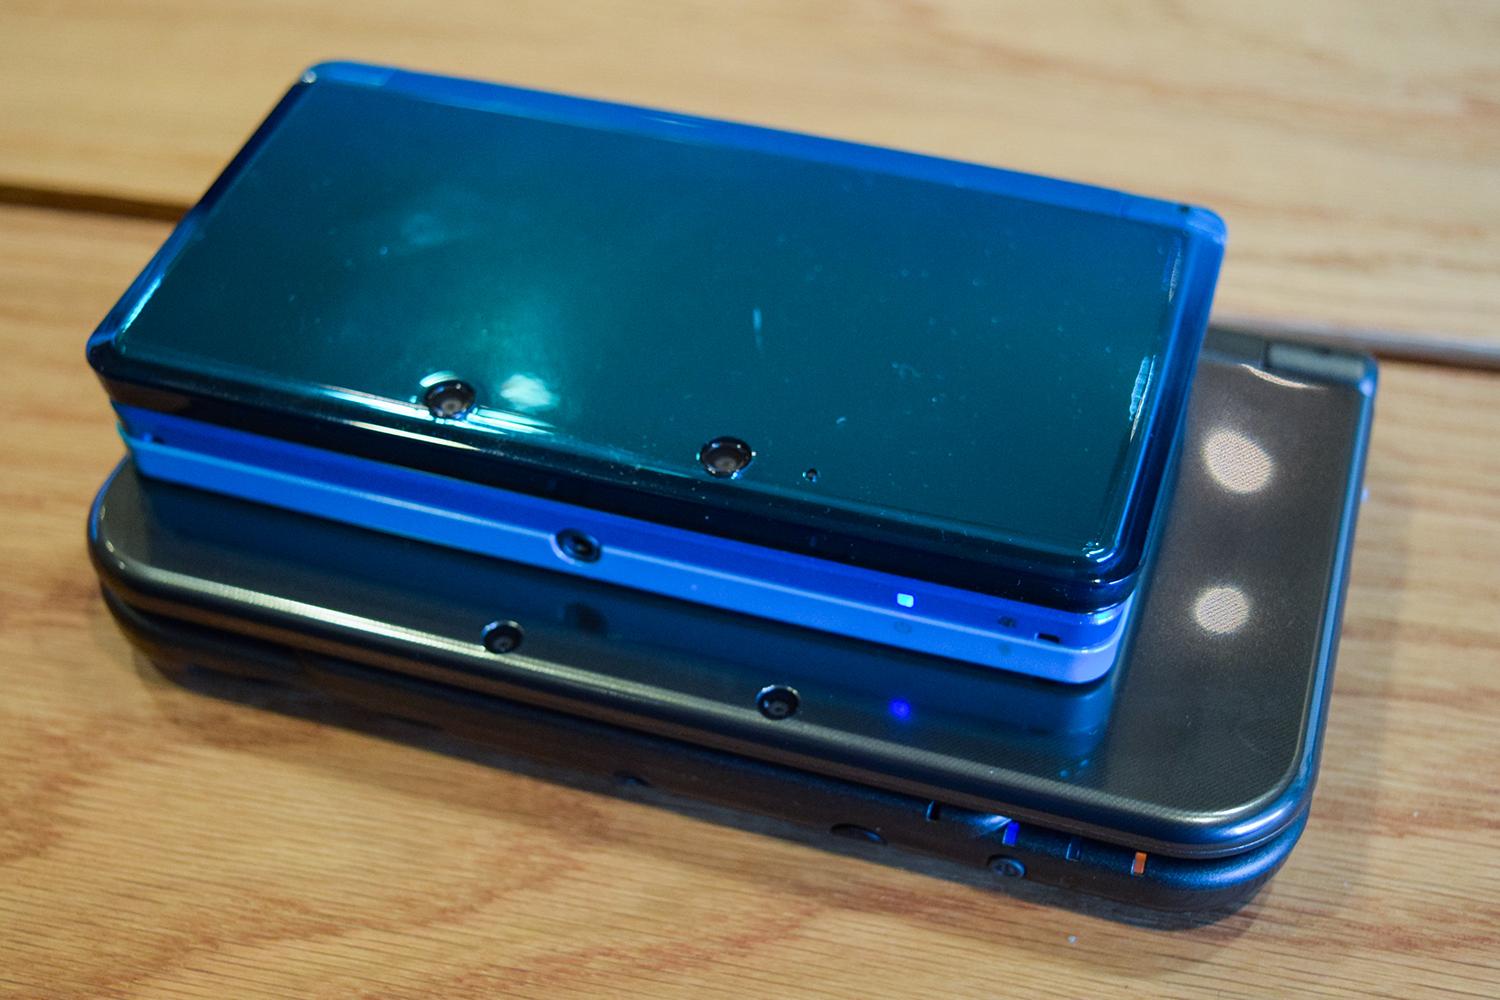 The Common Nintendo 3DS Problems and How to Fix Them | Digital